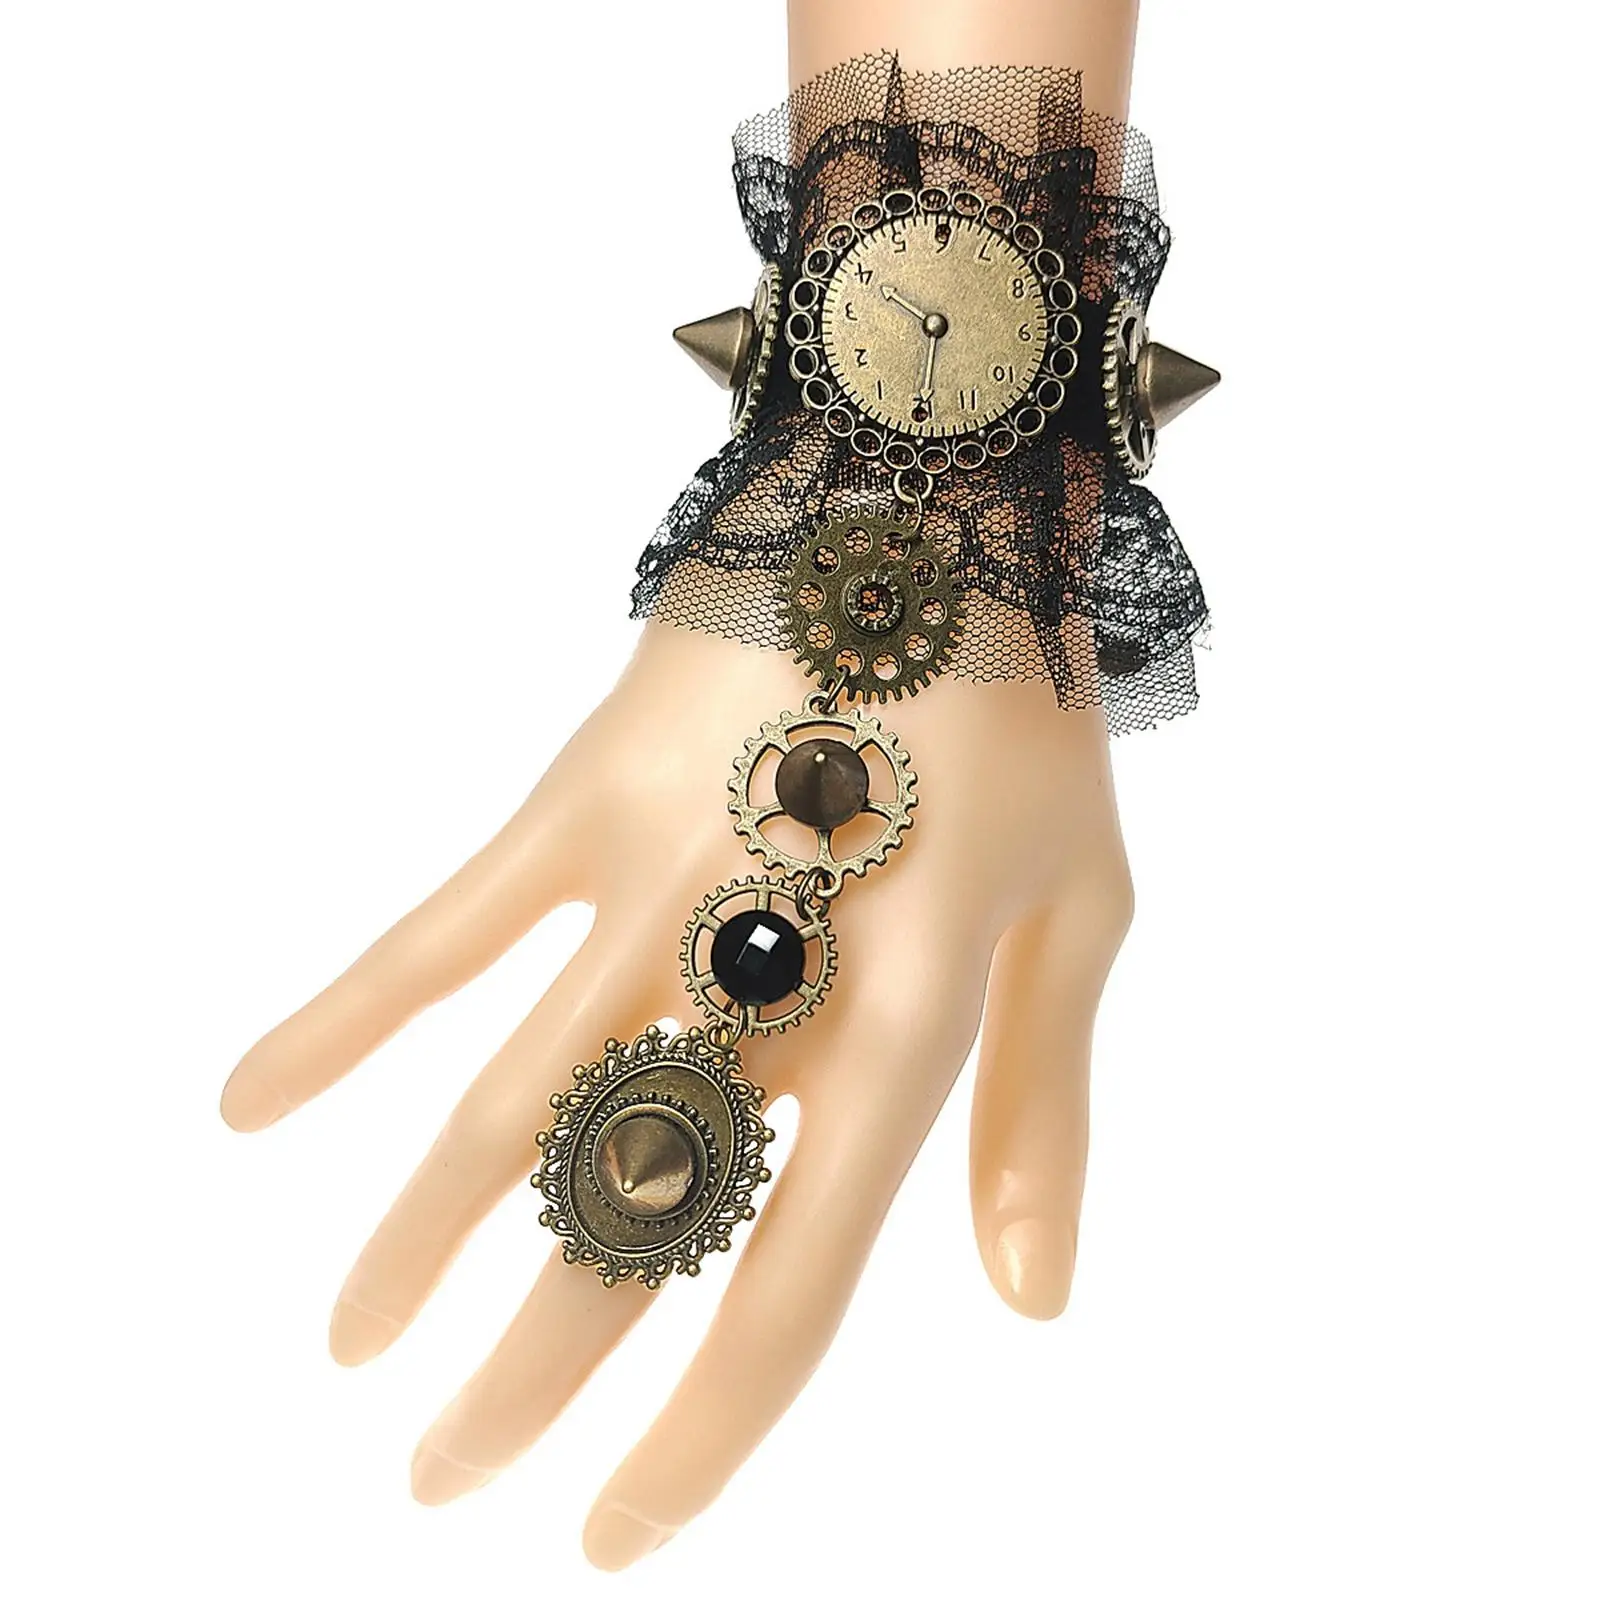 Vintage Style Steampunk Gloves Steampunk Accessories for Steampunk Party Decor